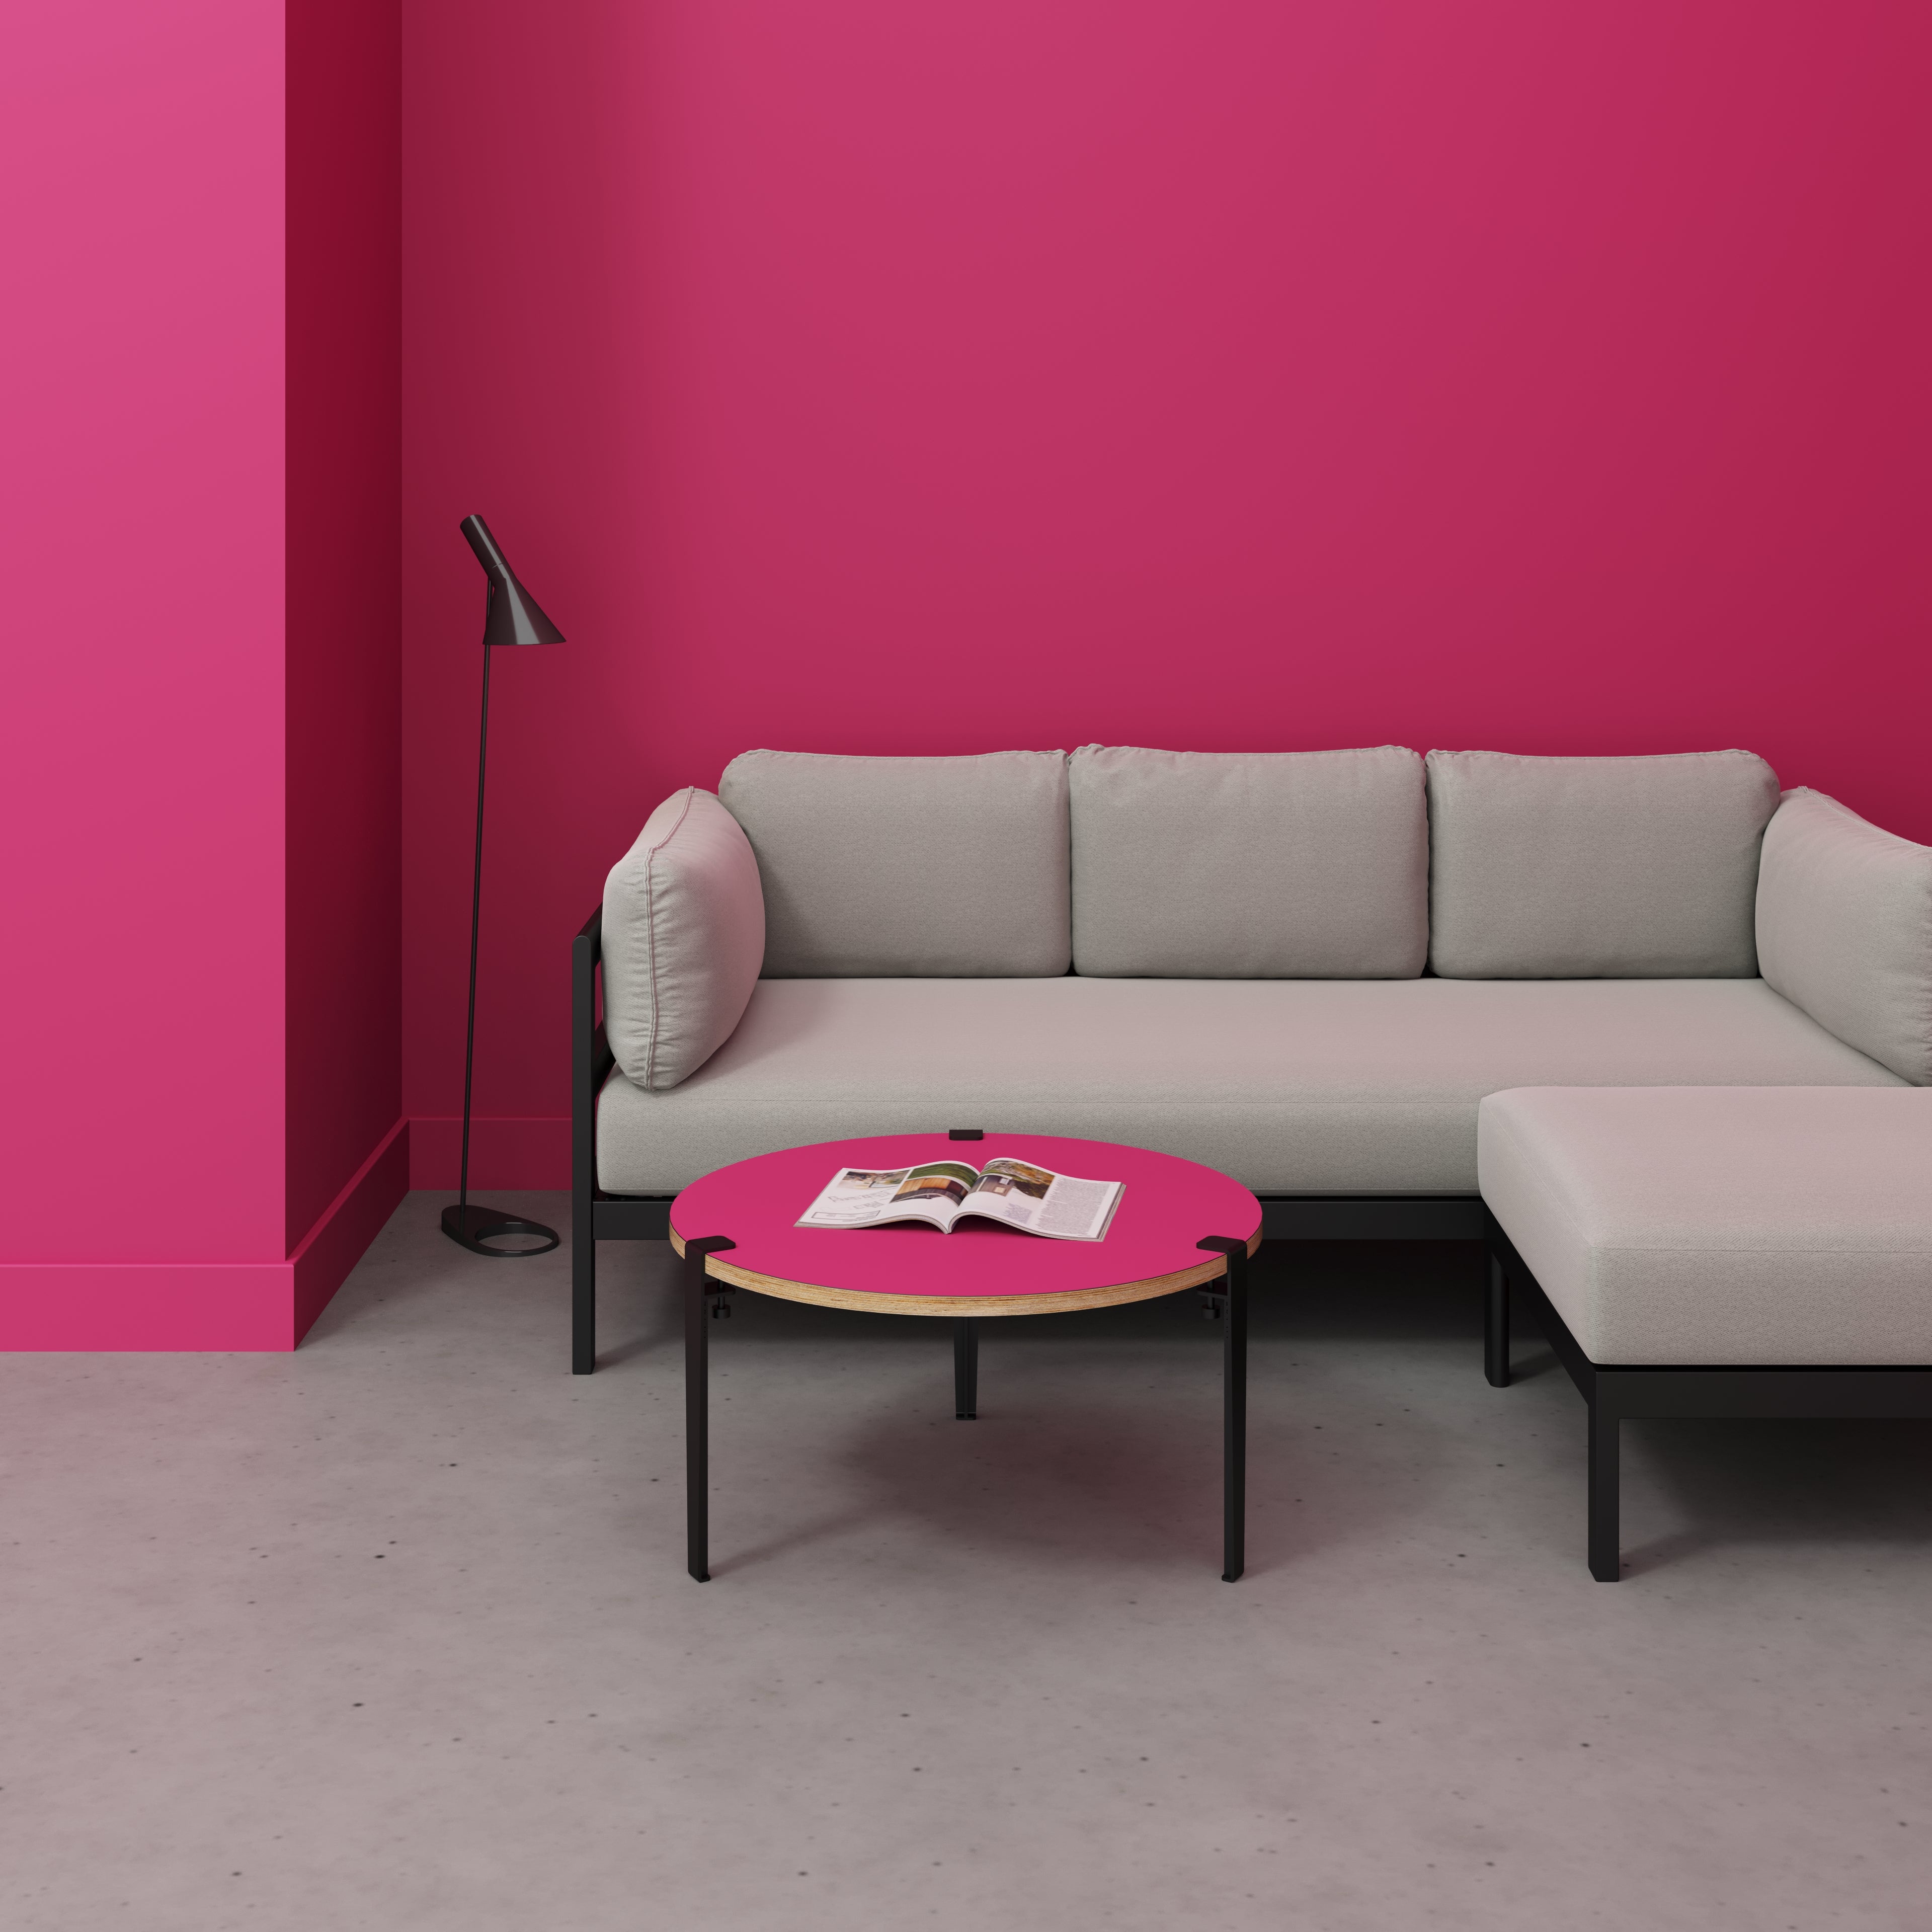 Round Coffee Table with Black Tiptoe Legs - Formica Juicy Pink - 800(dia) x 430(h)